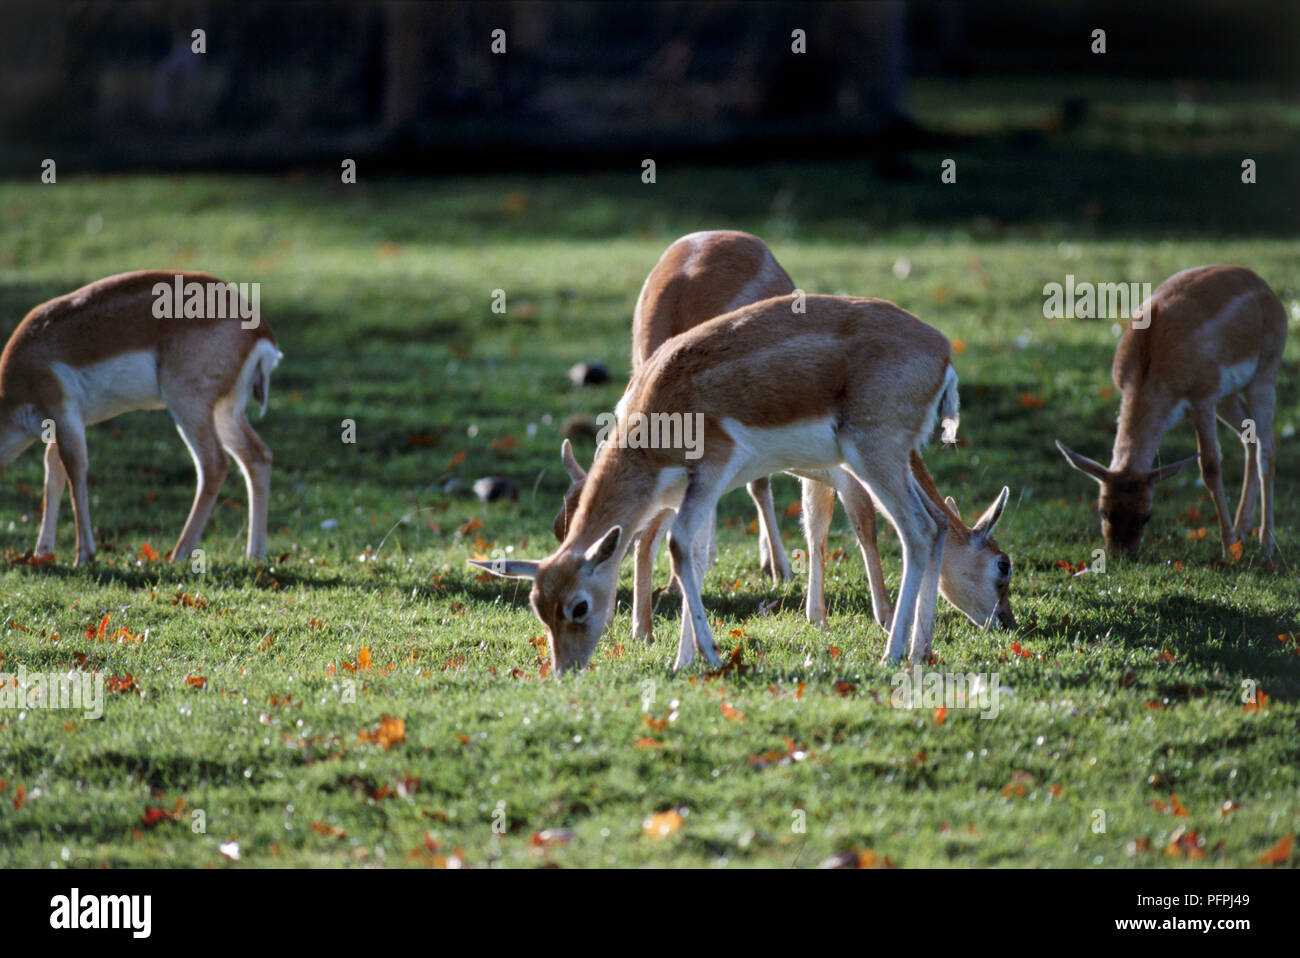 Young Axis deer (Axis axis) grazing in park Stock Photo